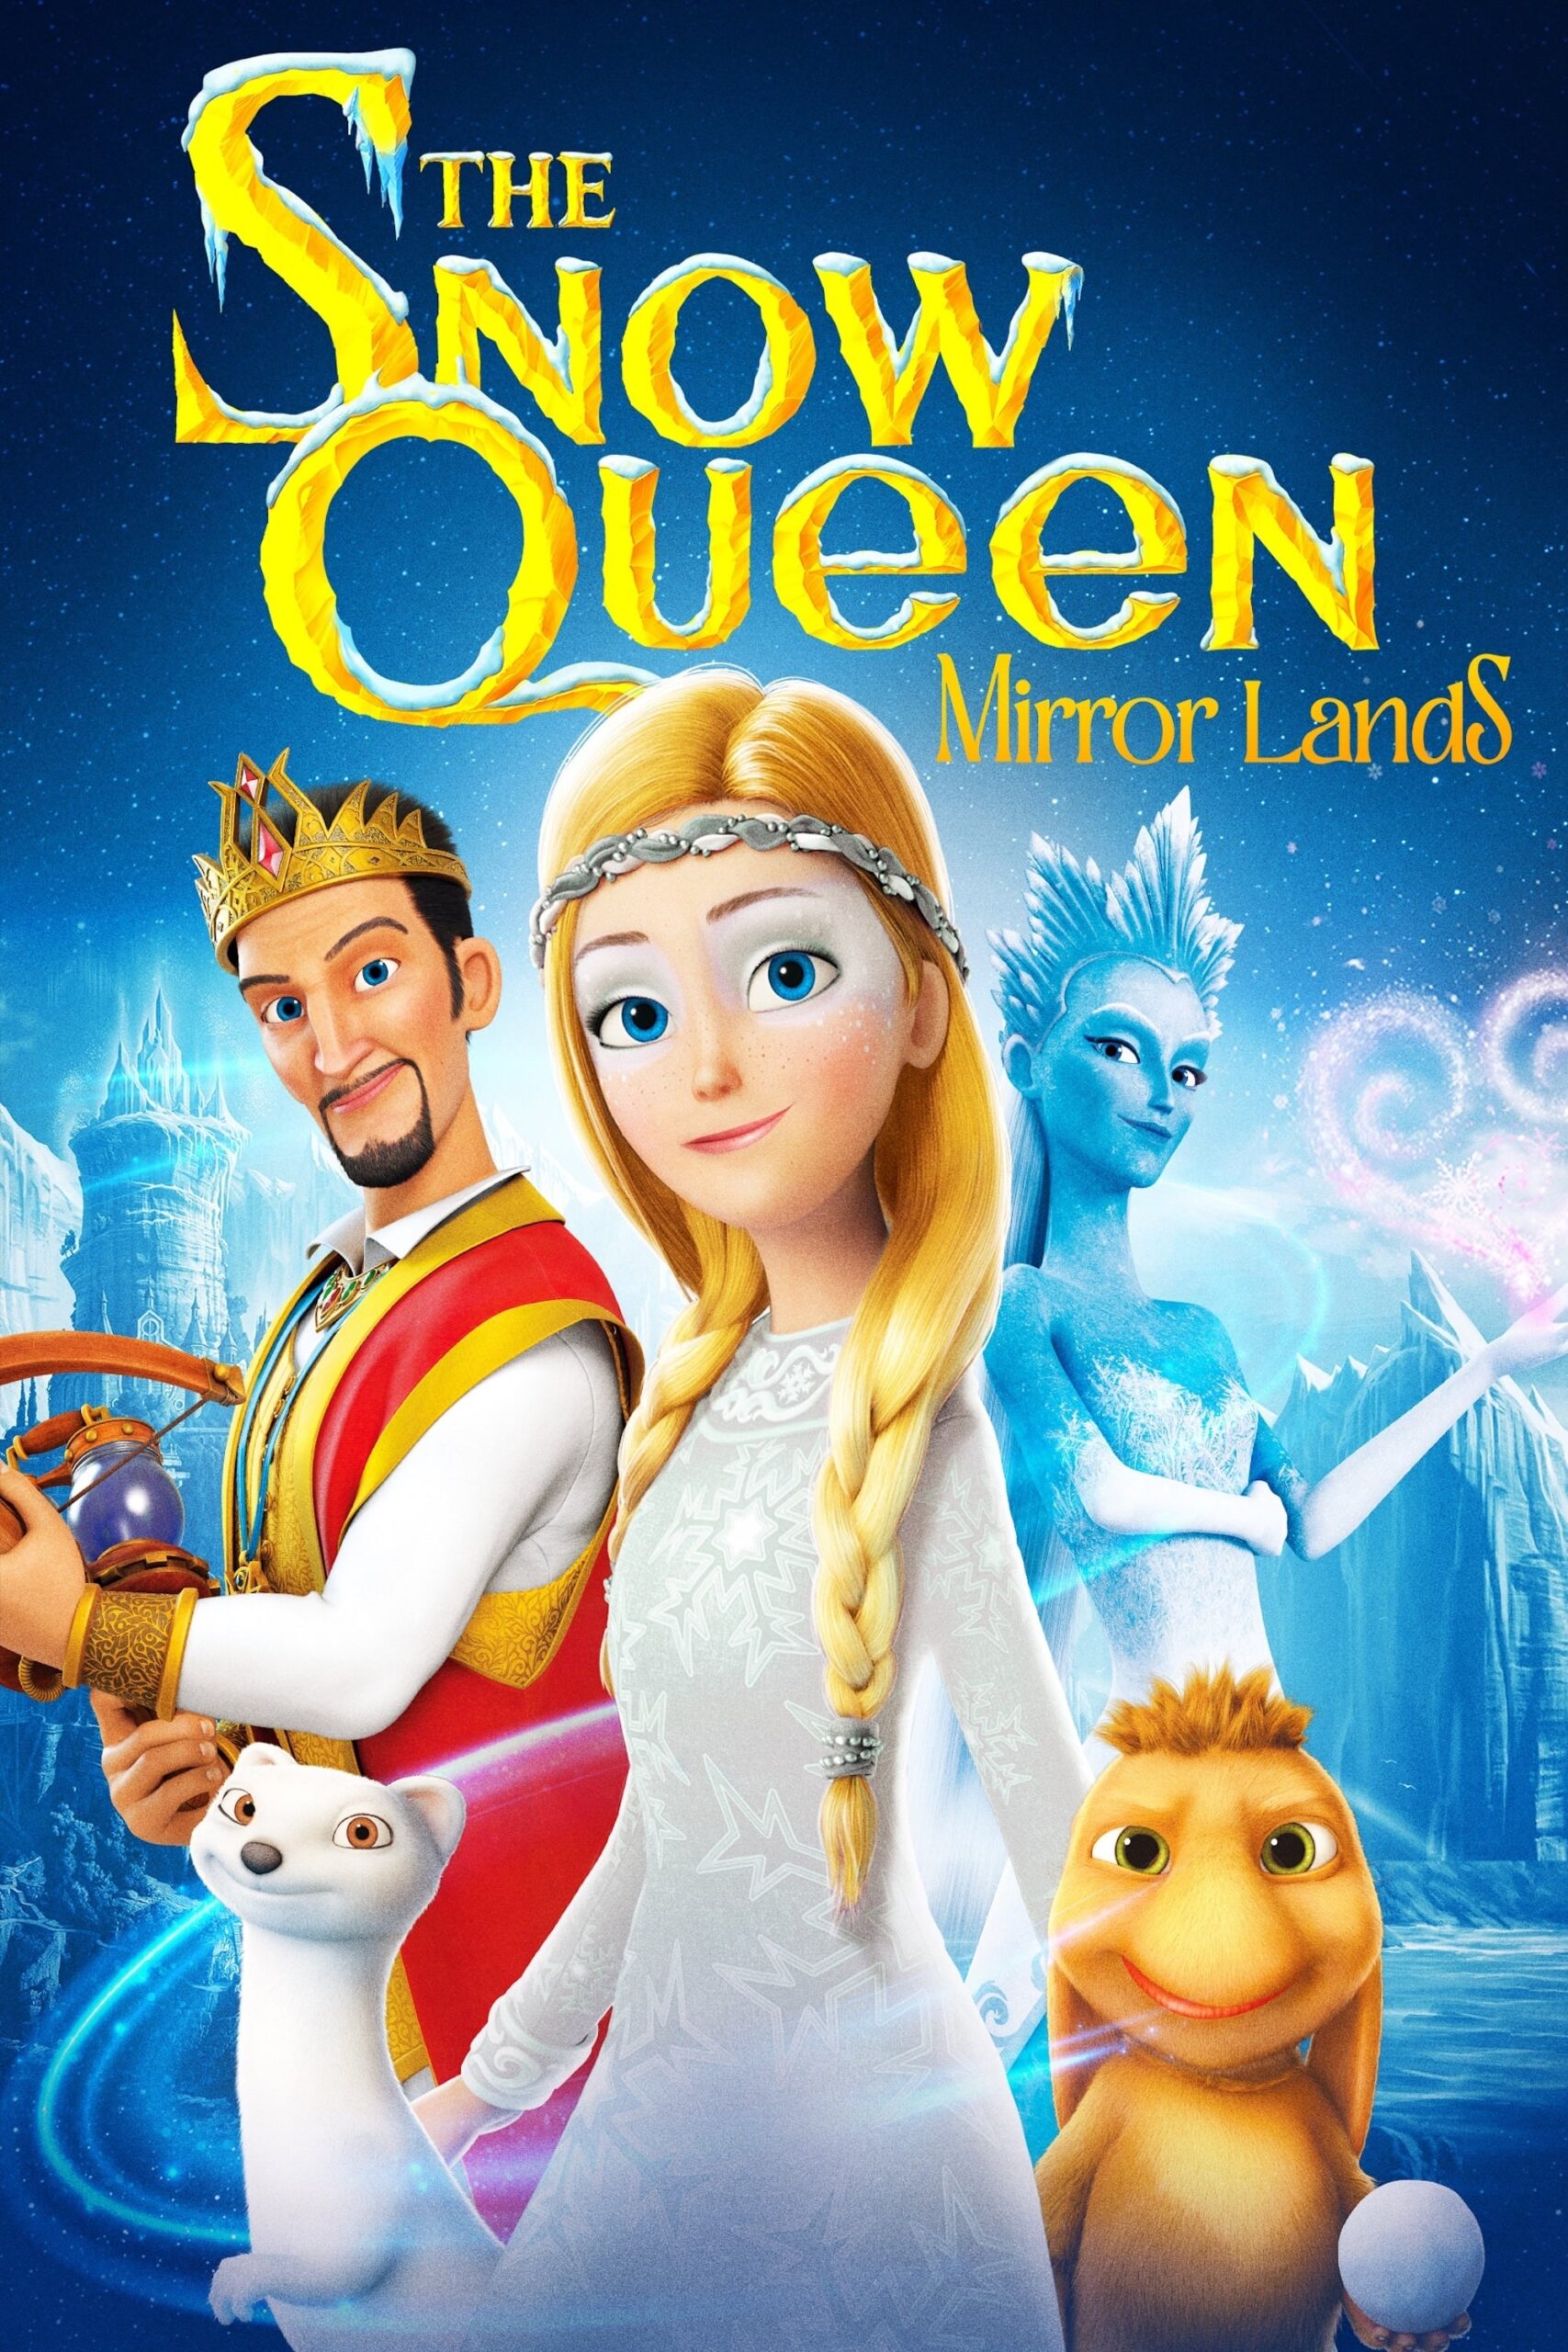 The Snow Queen 4 Mirrorlands 2018 Hindi ORG Dual Audio 300MB BluRay ESub 480p Download